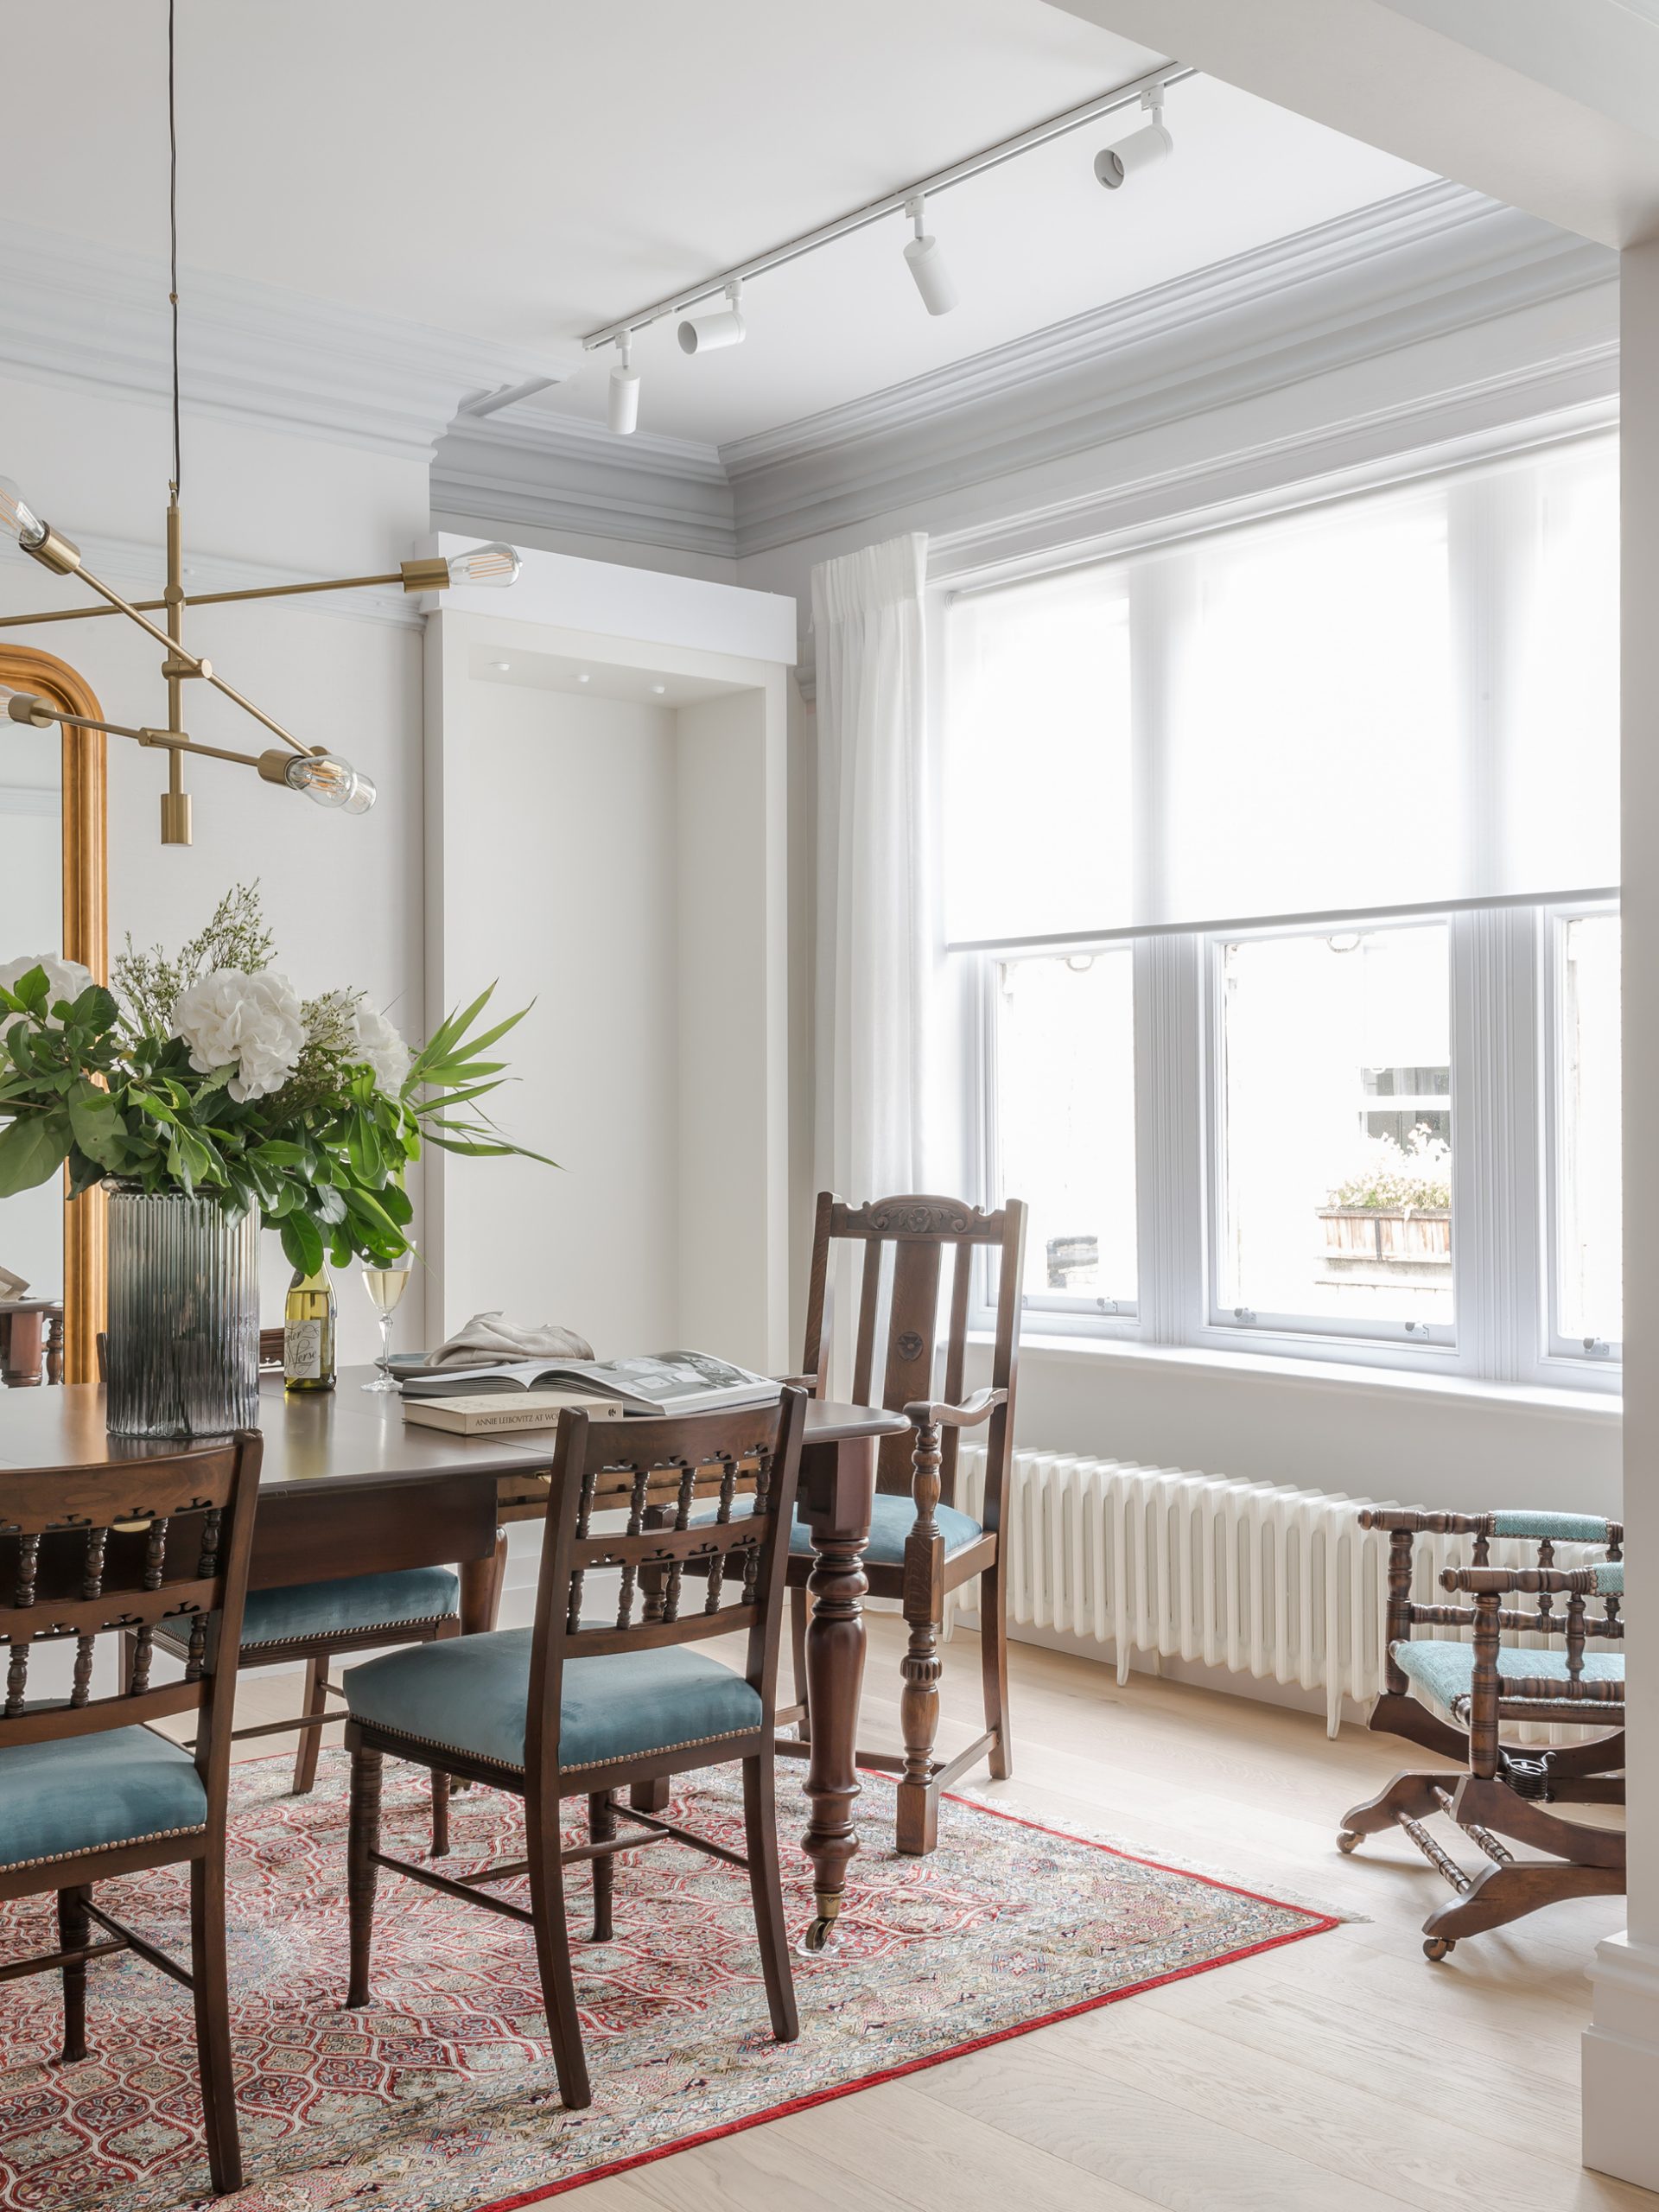 Bloomsbury Apartment - Dining Room Overview - With integrated antique furniture